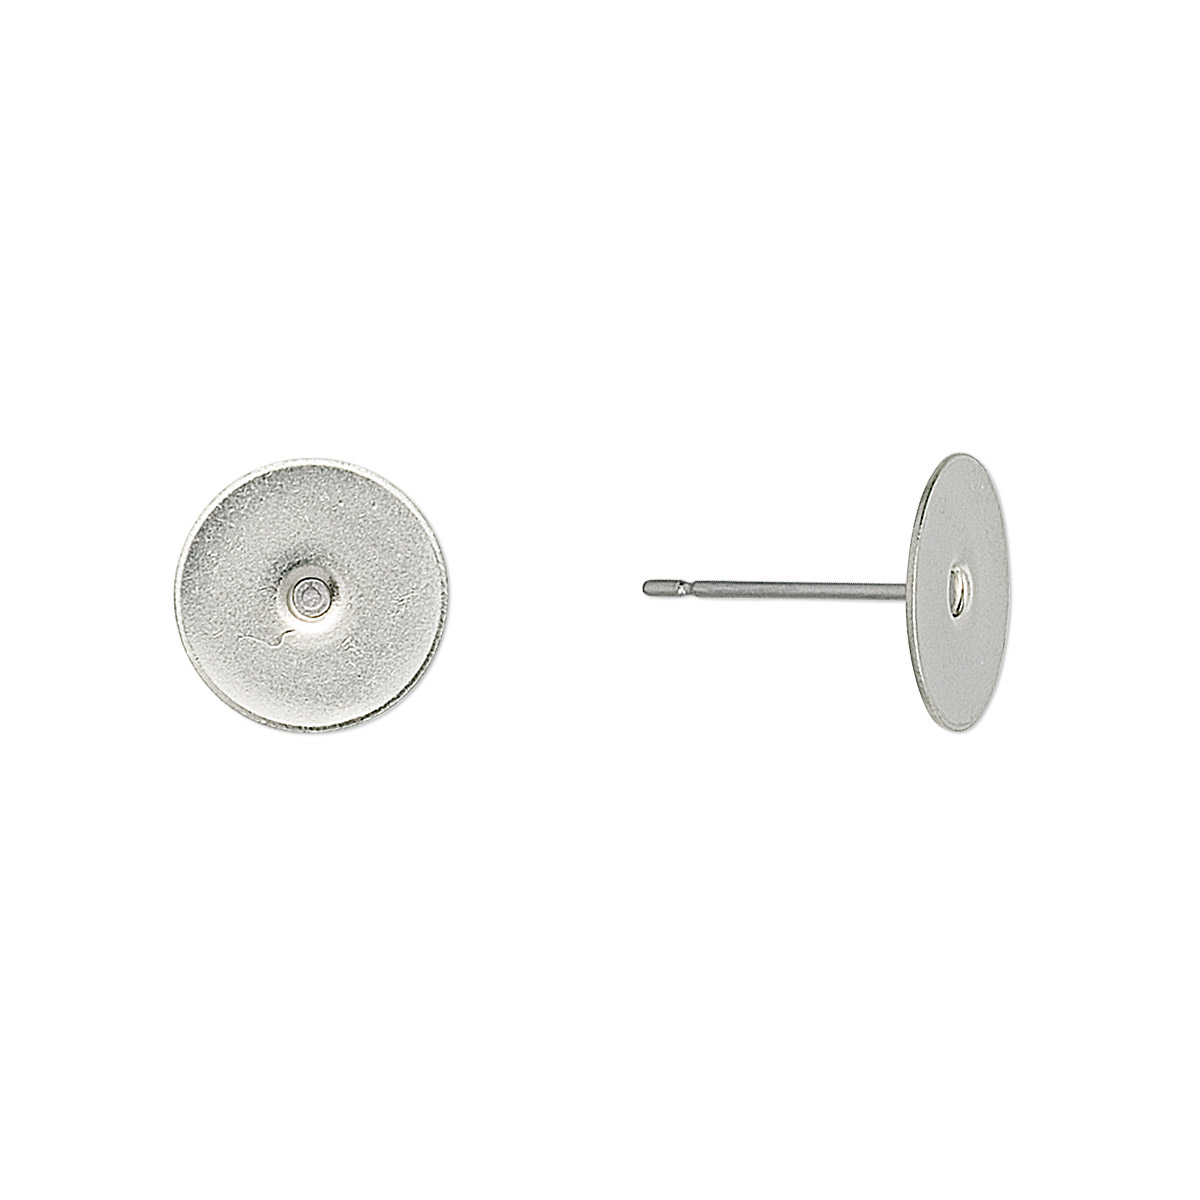 Earstud, silver-finished brass, 10mm flat pad. Sold per pkg of 50 pairs ...